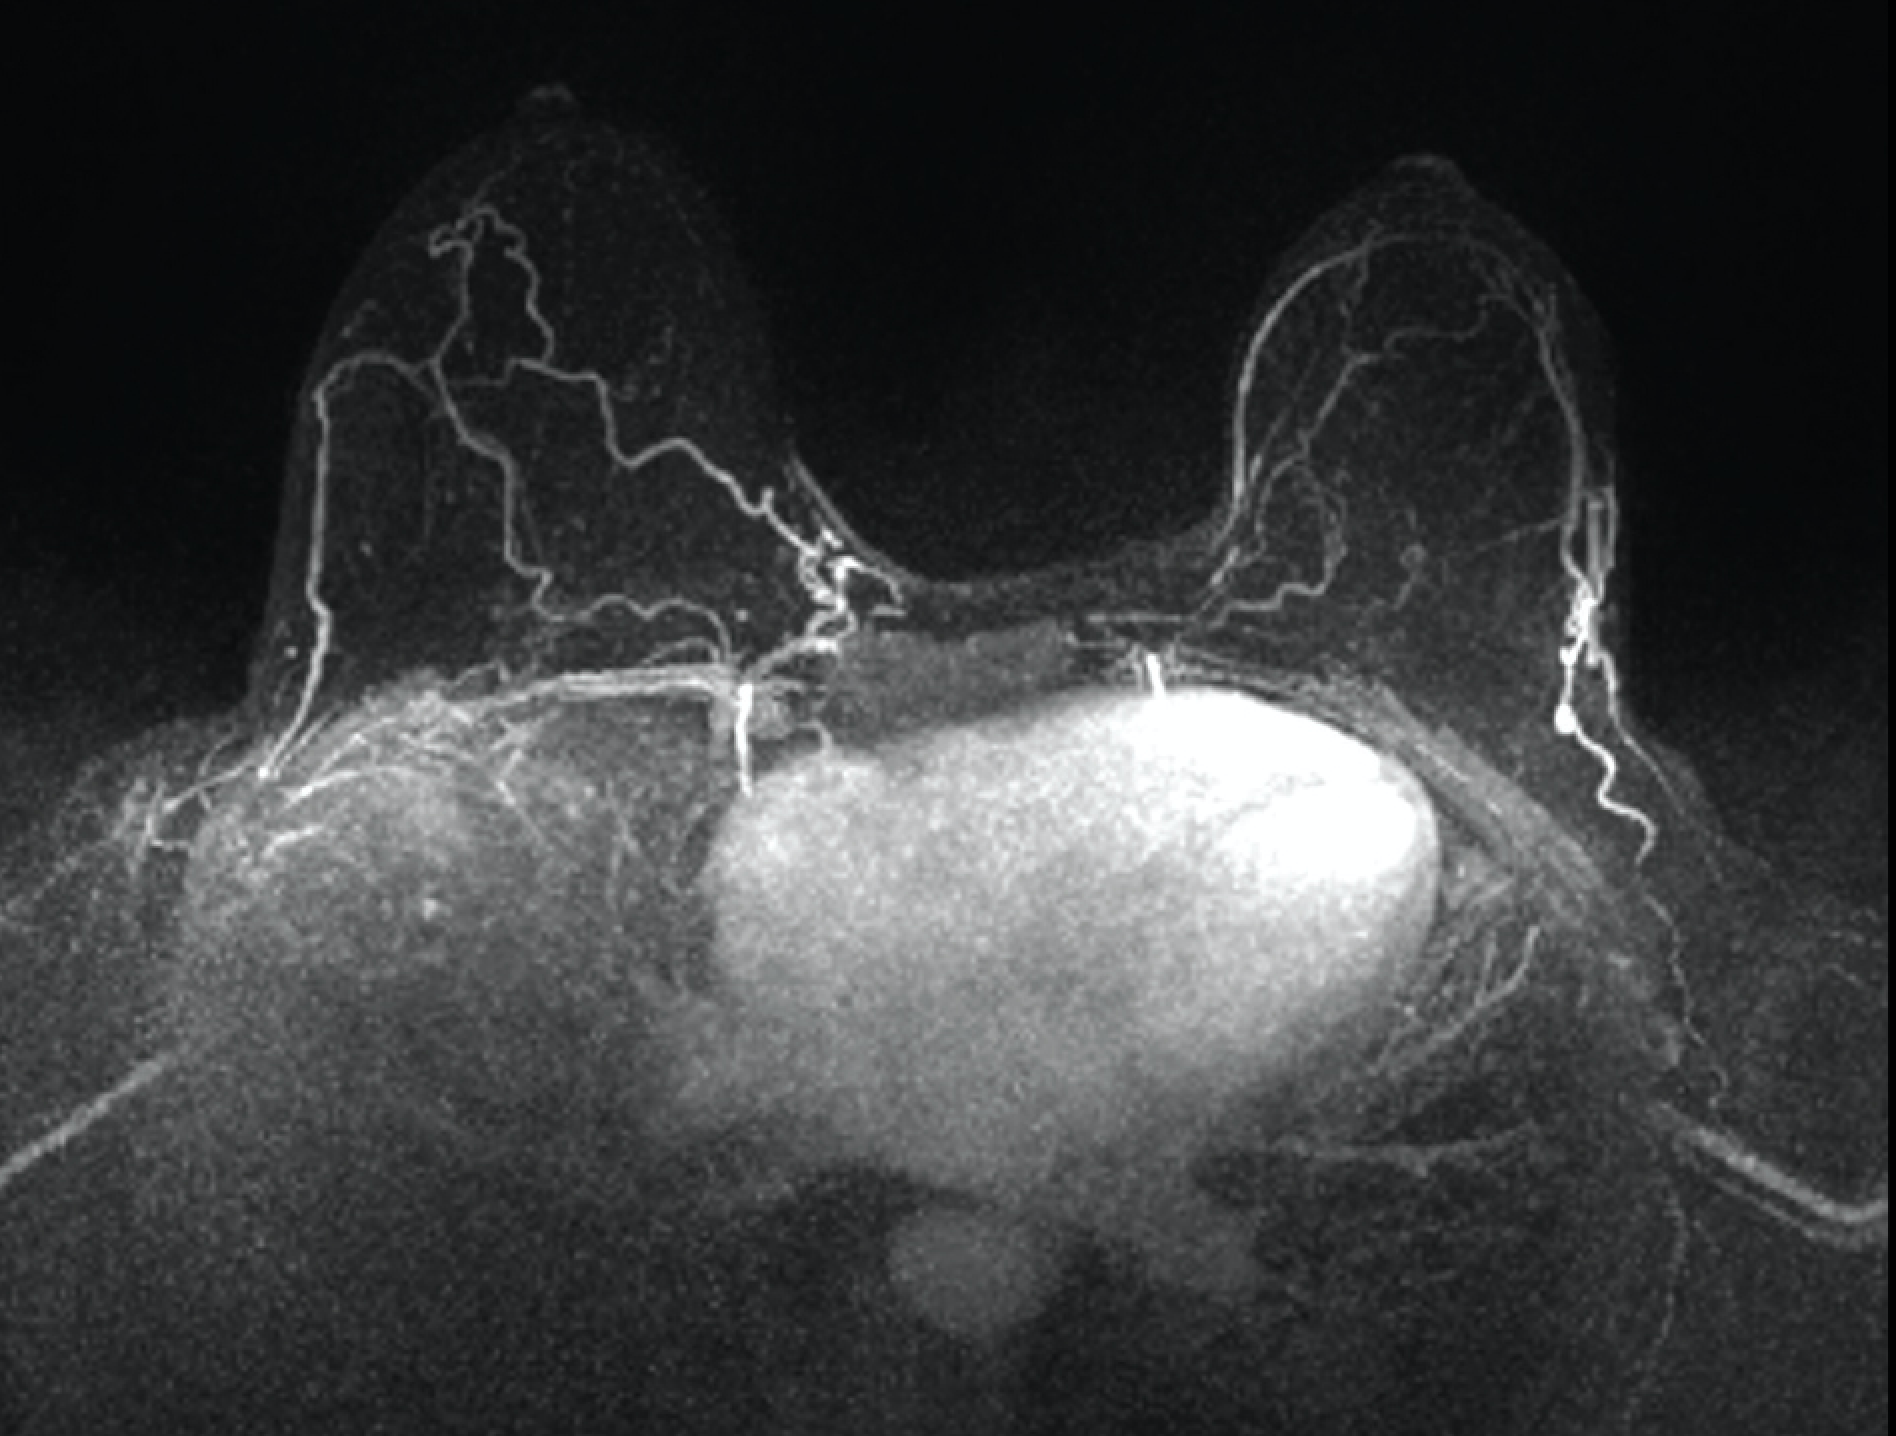 Gadolinium-based contrast in breast MRI: What ob/gyns need to know